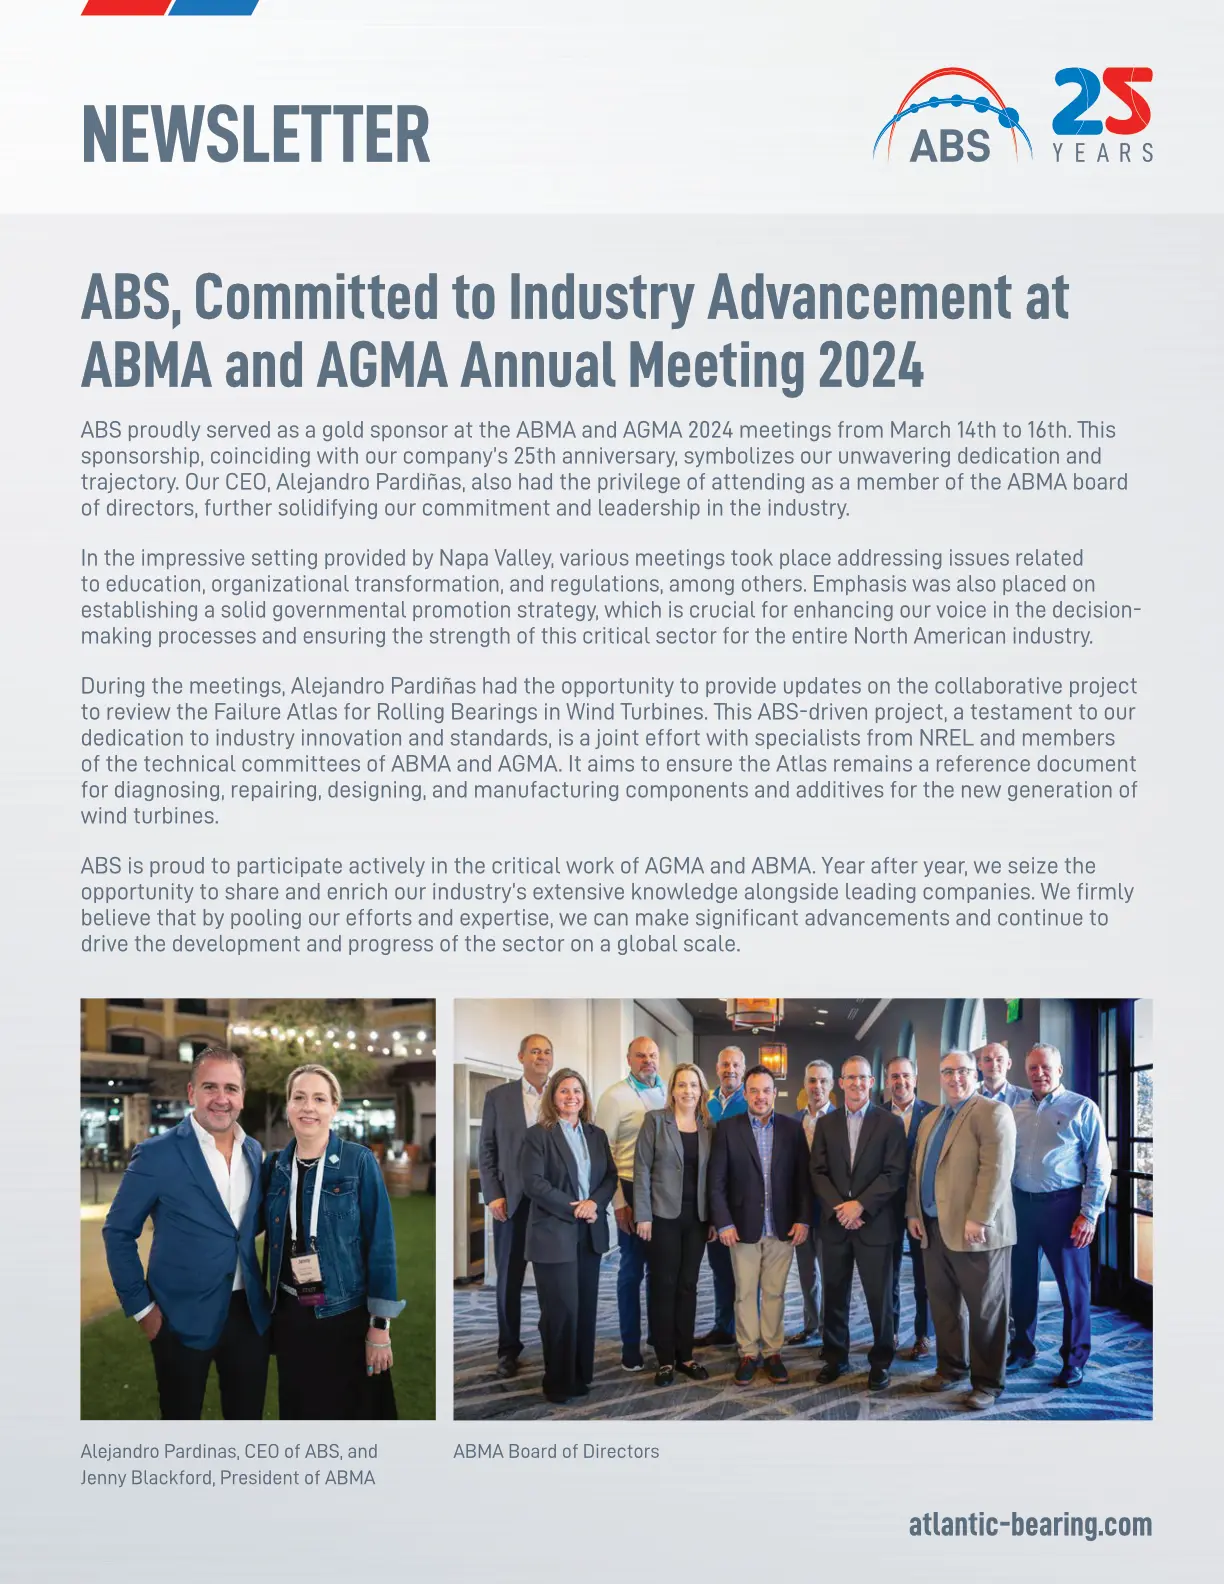 ABS, Committed to Industry Advancement at ABMA and AGMA Annual Meeting 2024